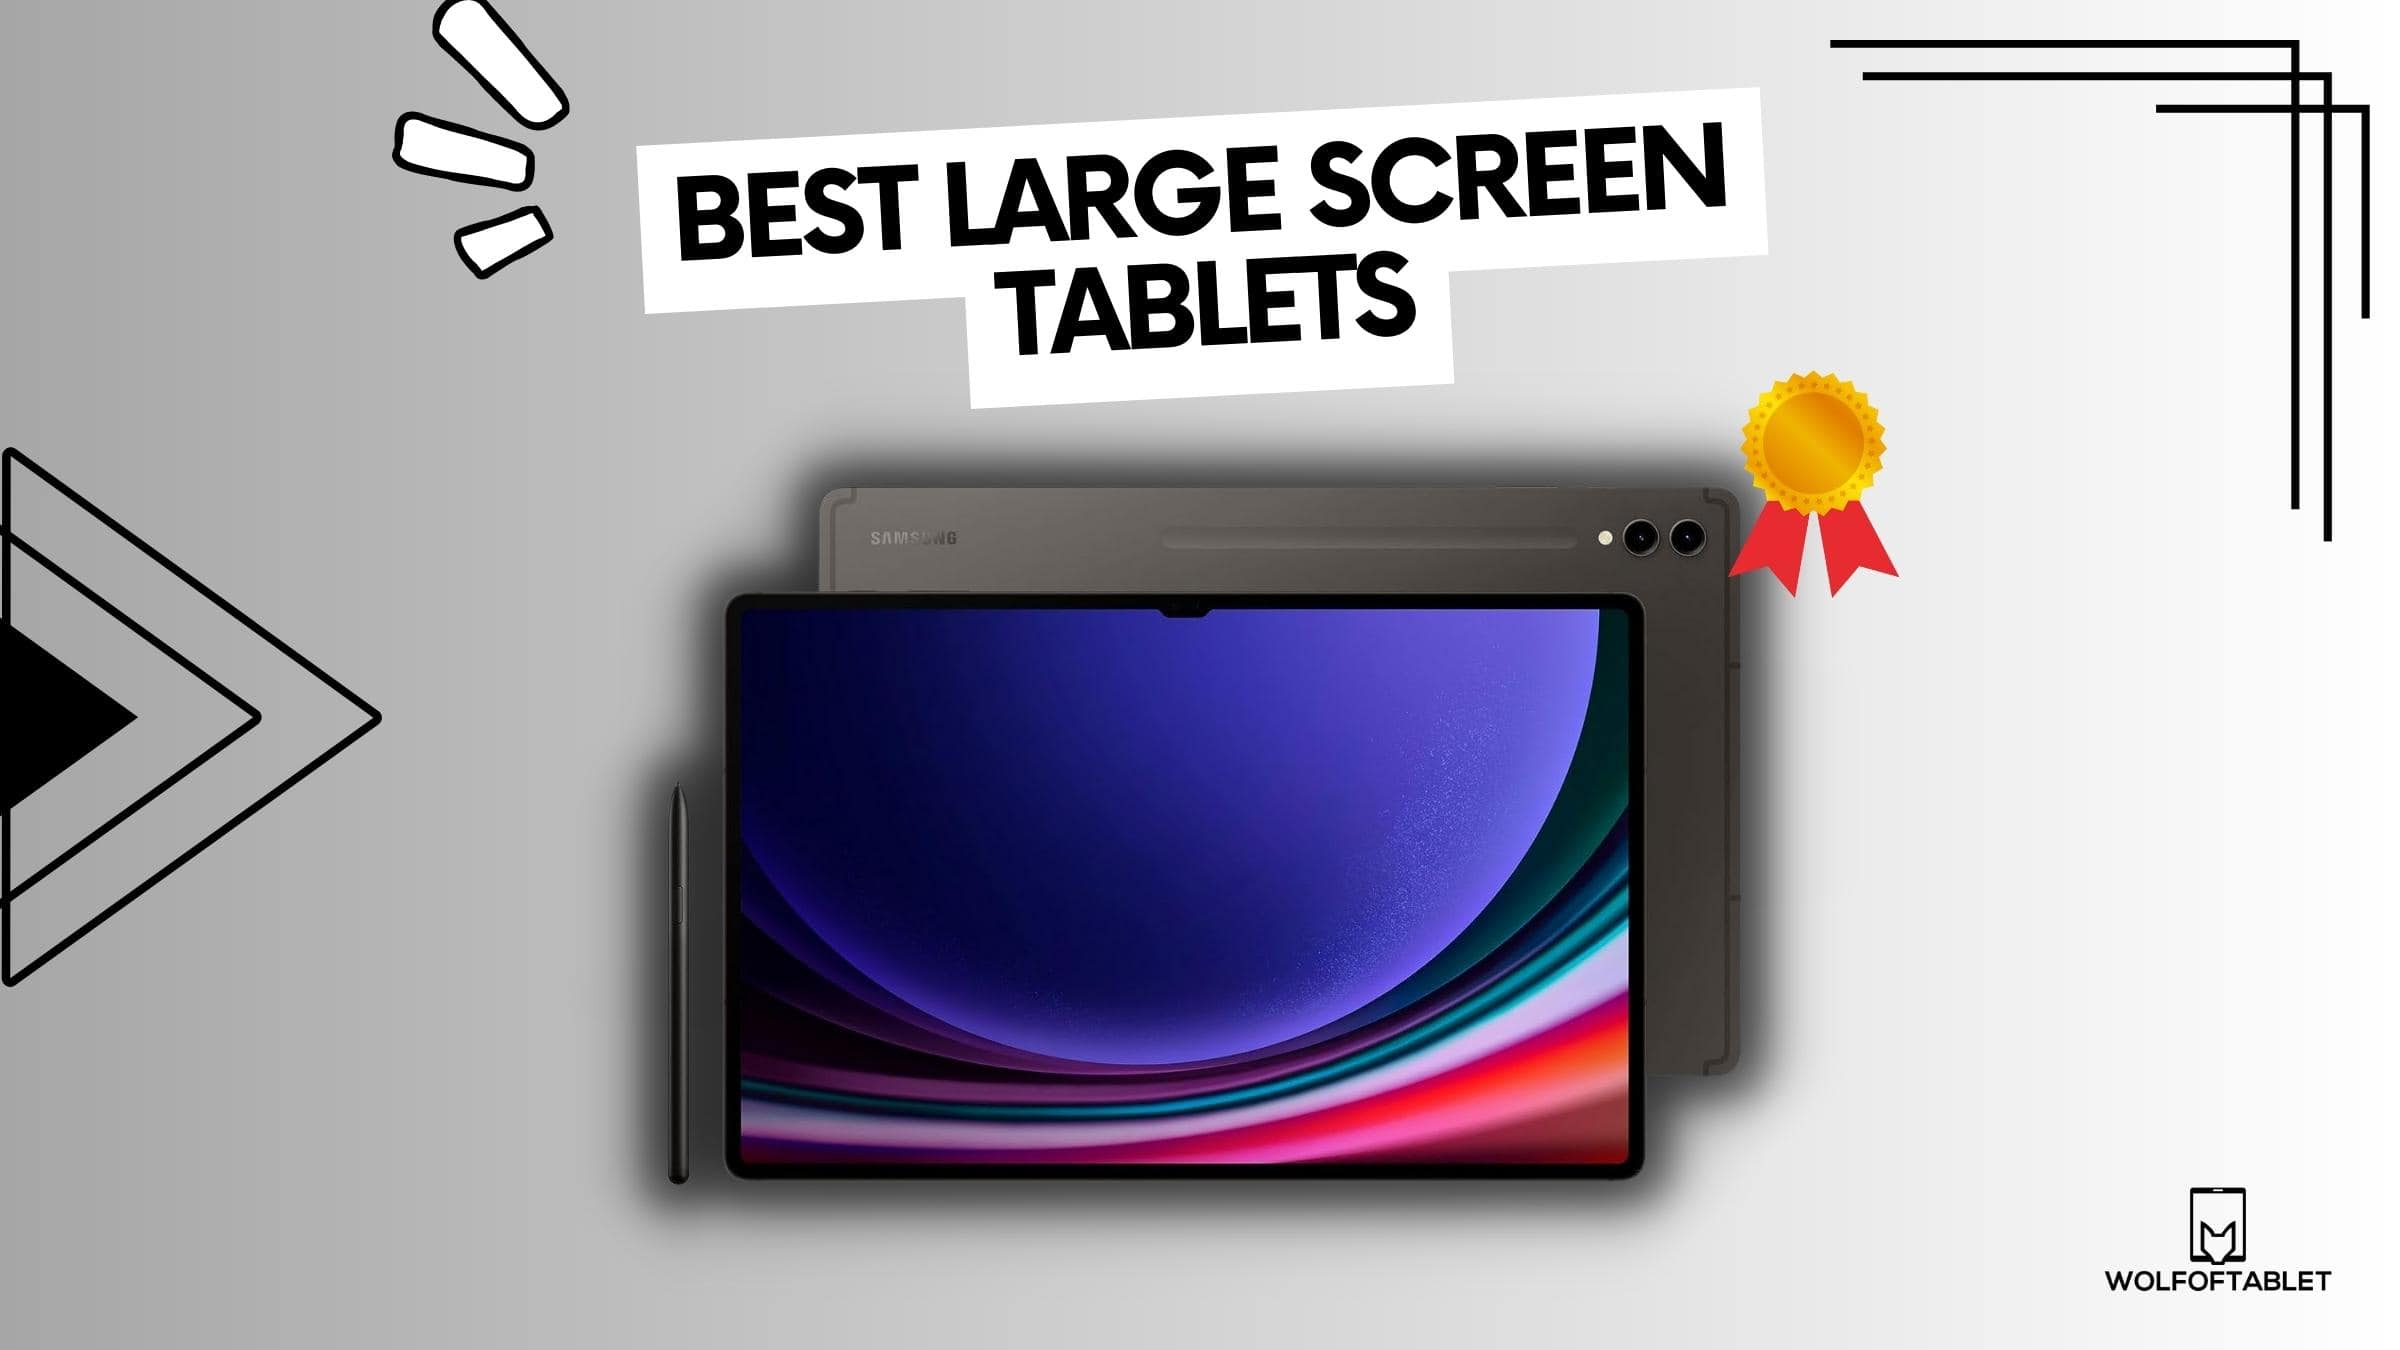 best large screen tablets - top list